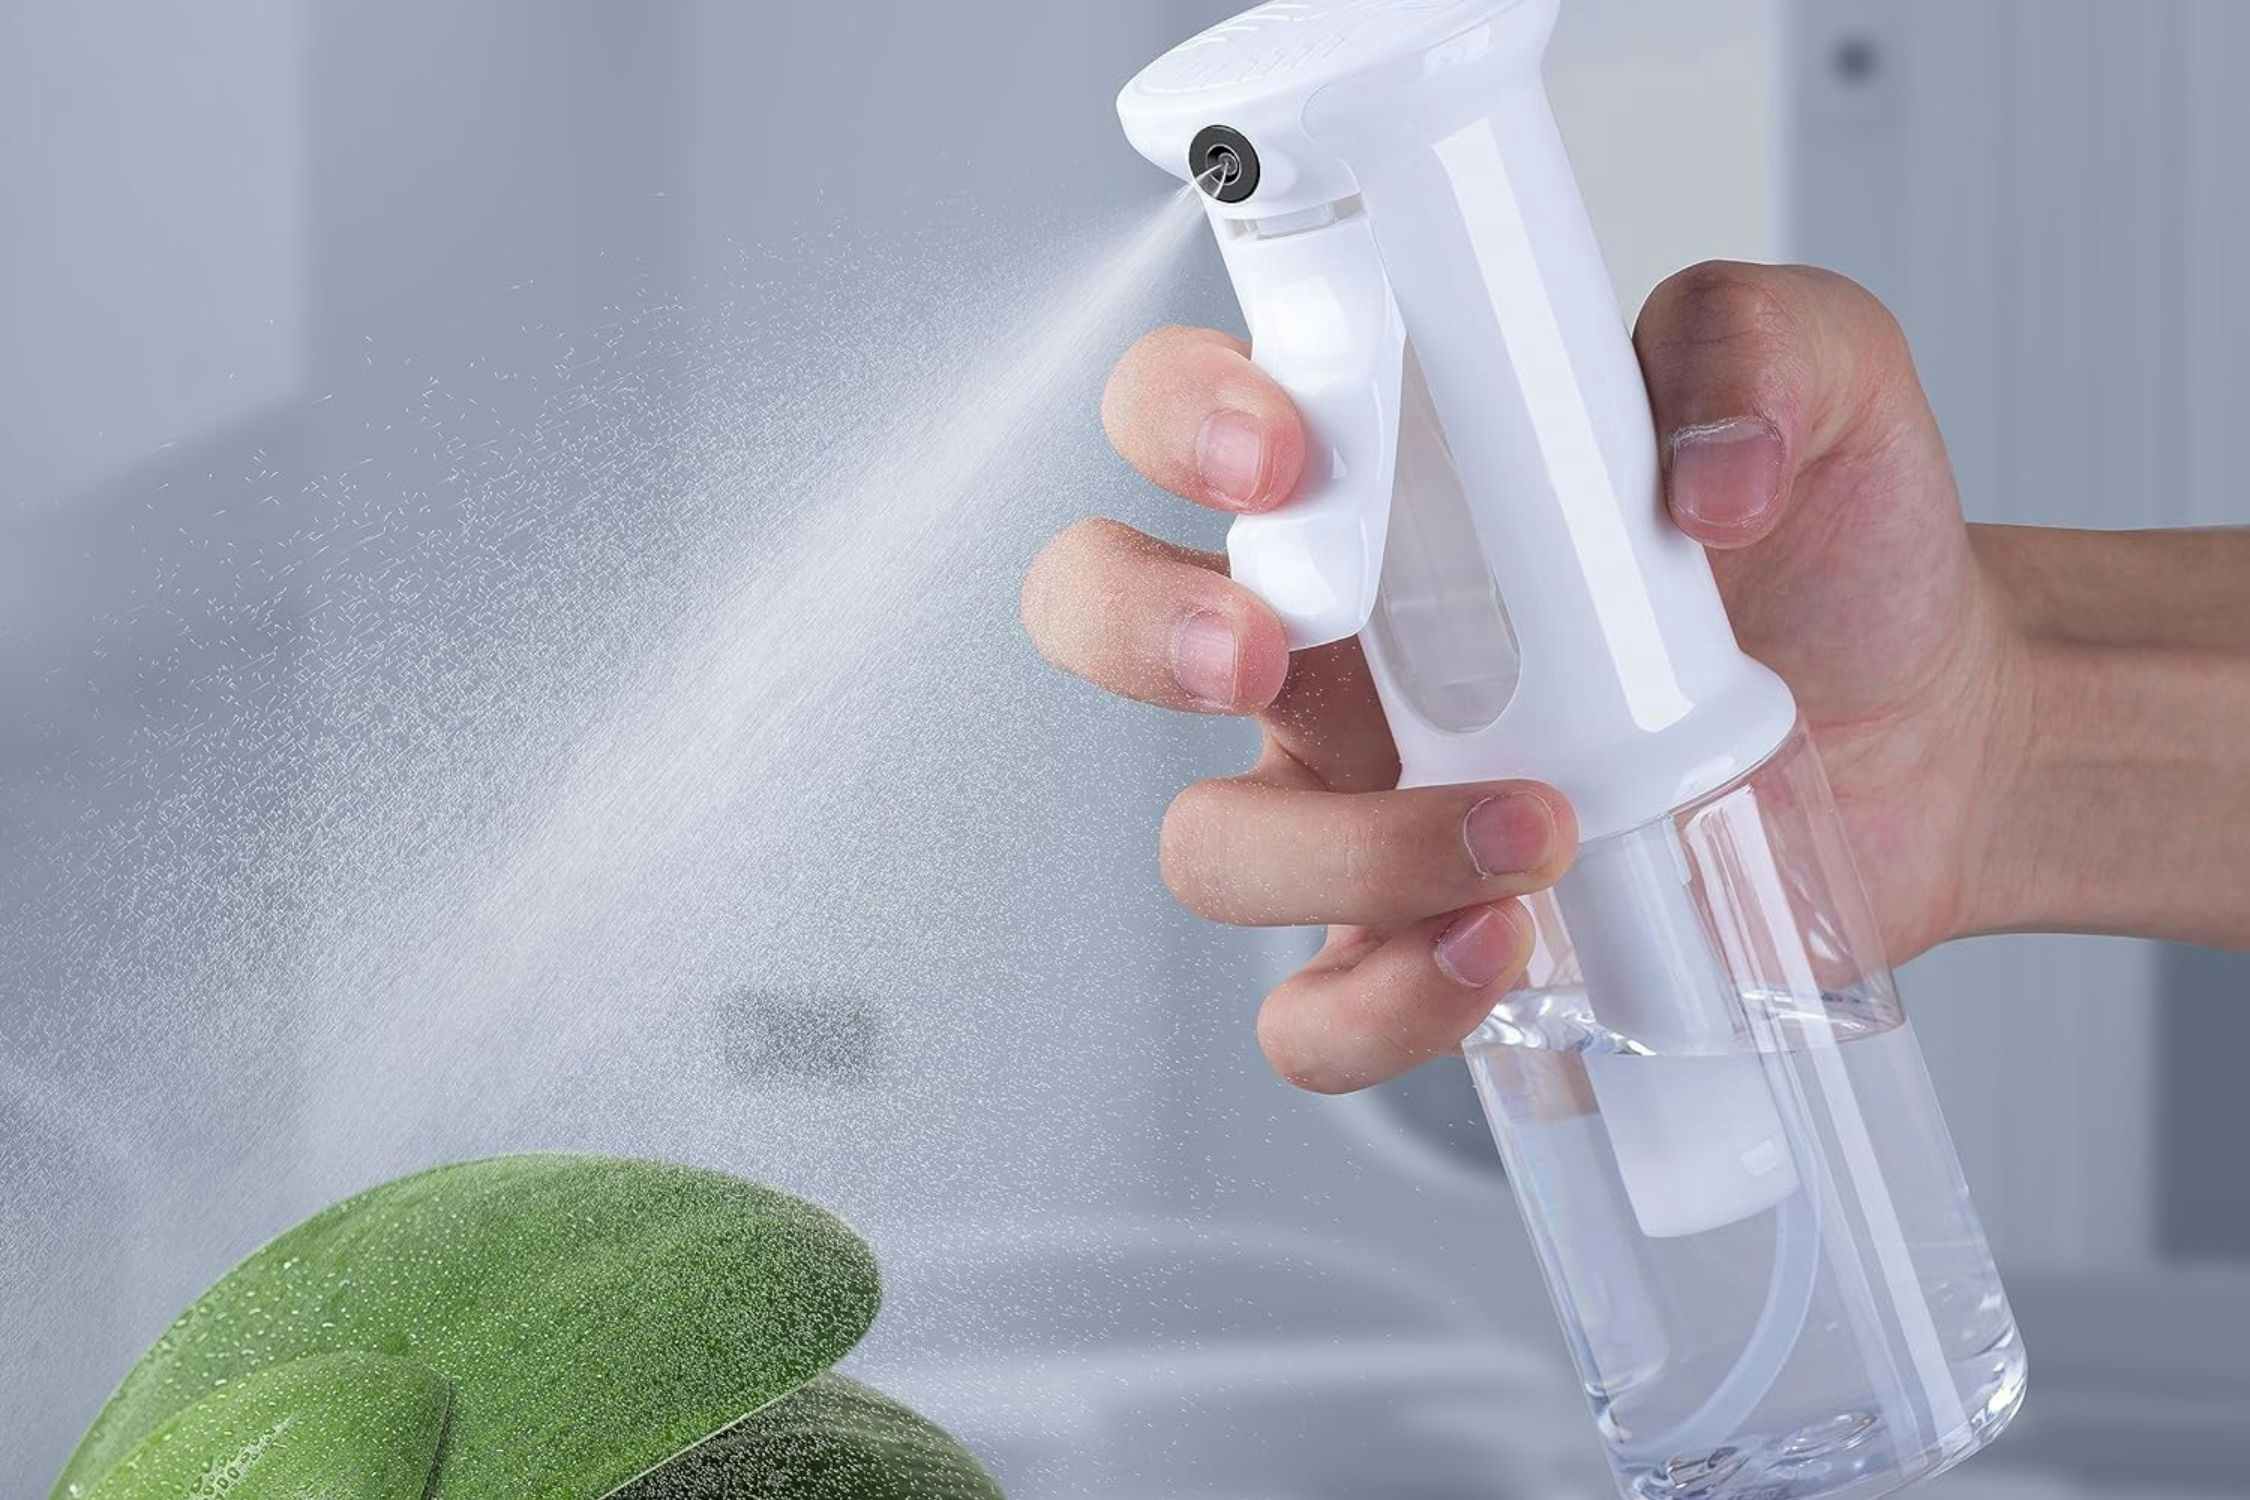 Fine Mist Continuous Spray Bottle, Only $4 on Amazon